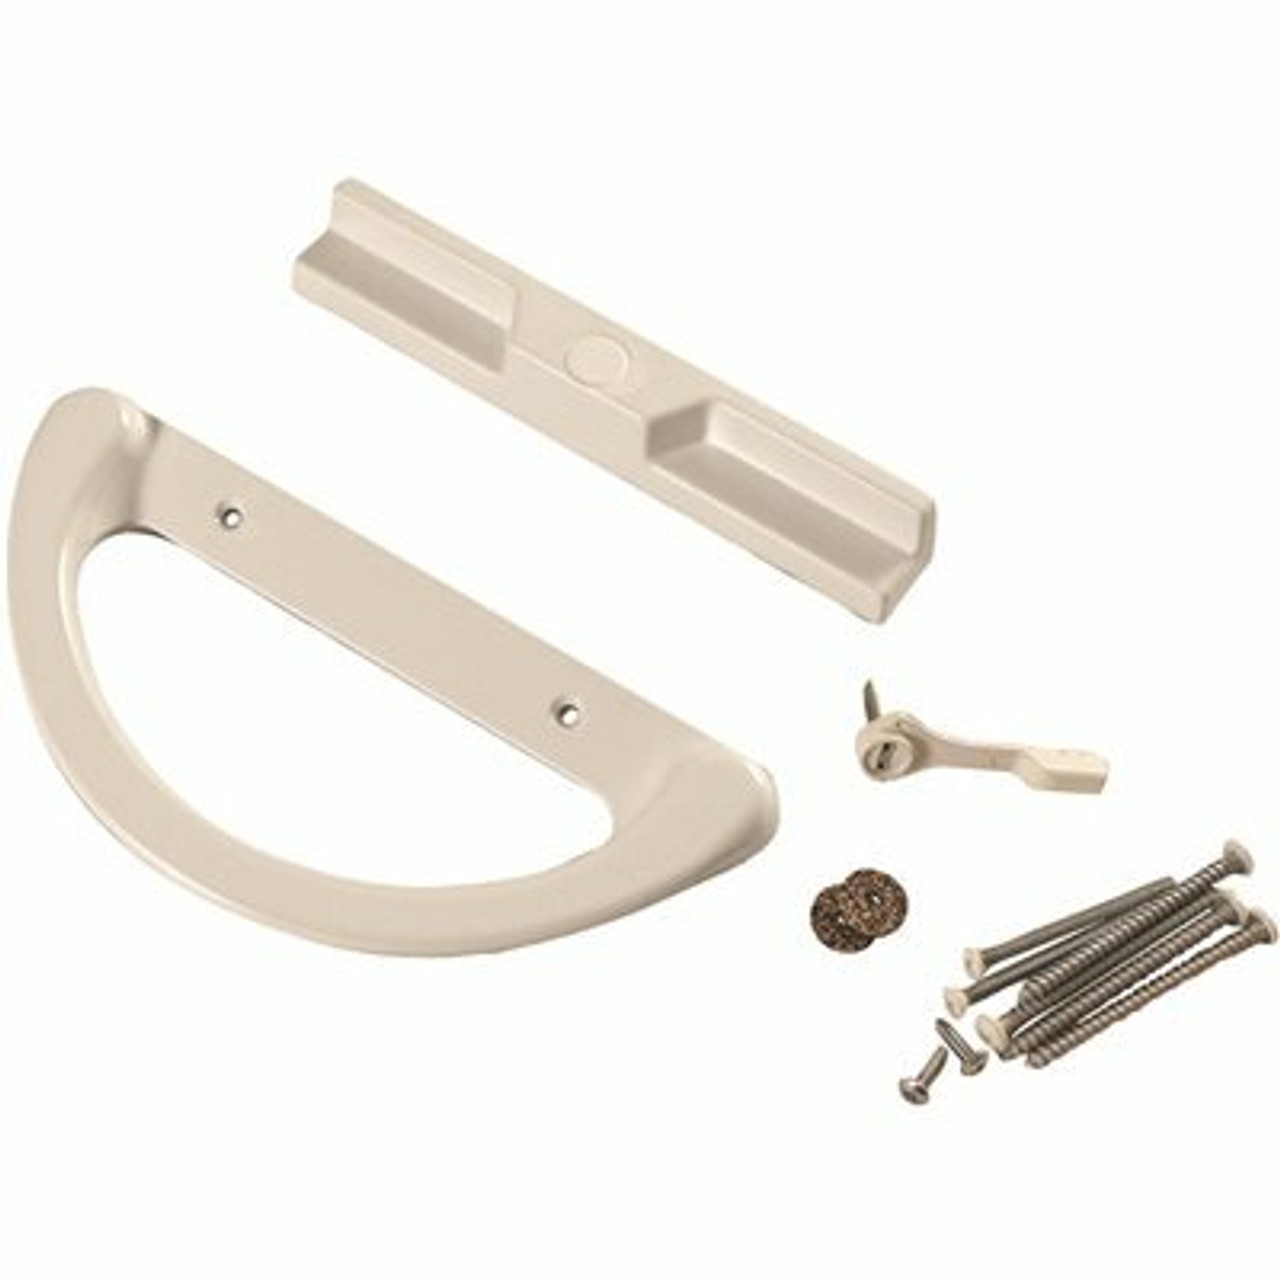 Strybuc Industries Patio Glass Door Handle Assembly Pack Of 2) - 317315188